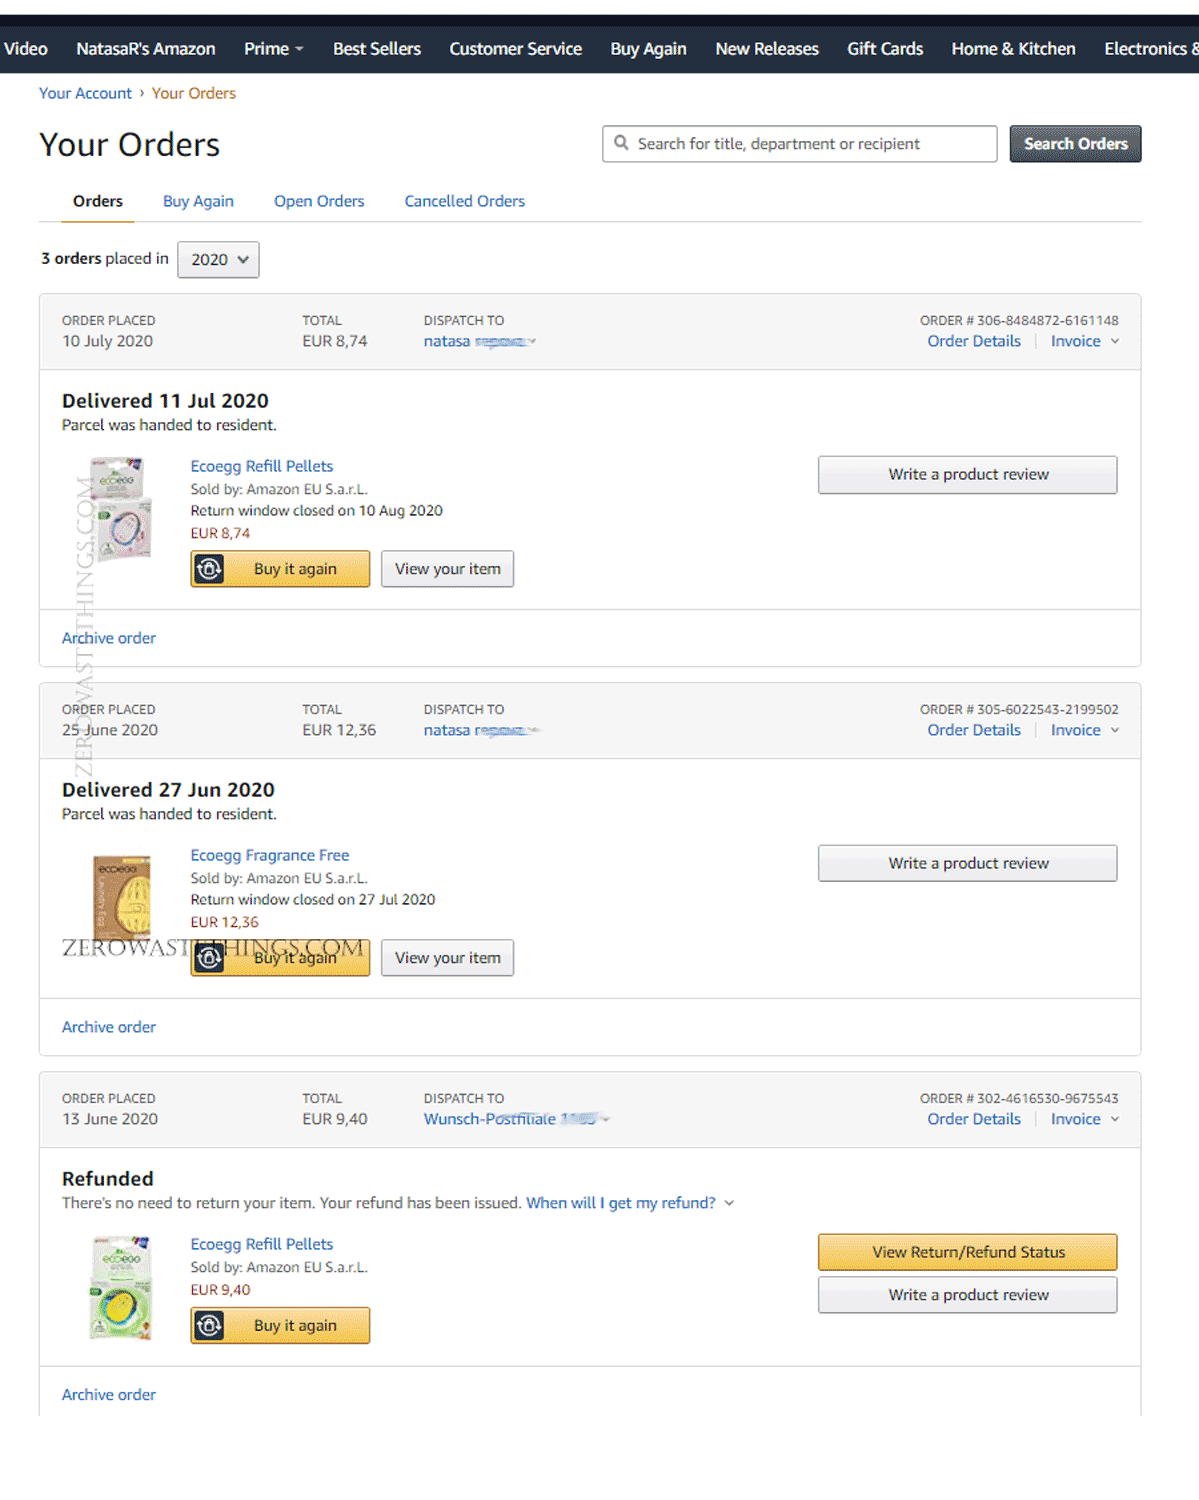 Personal Amazon account showing purchase of sustainable laundry products. This is not a sponsored review. 